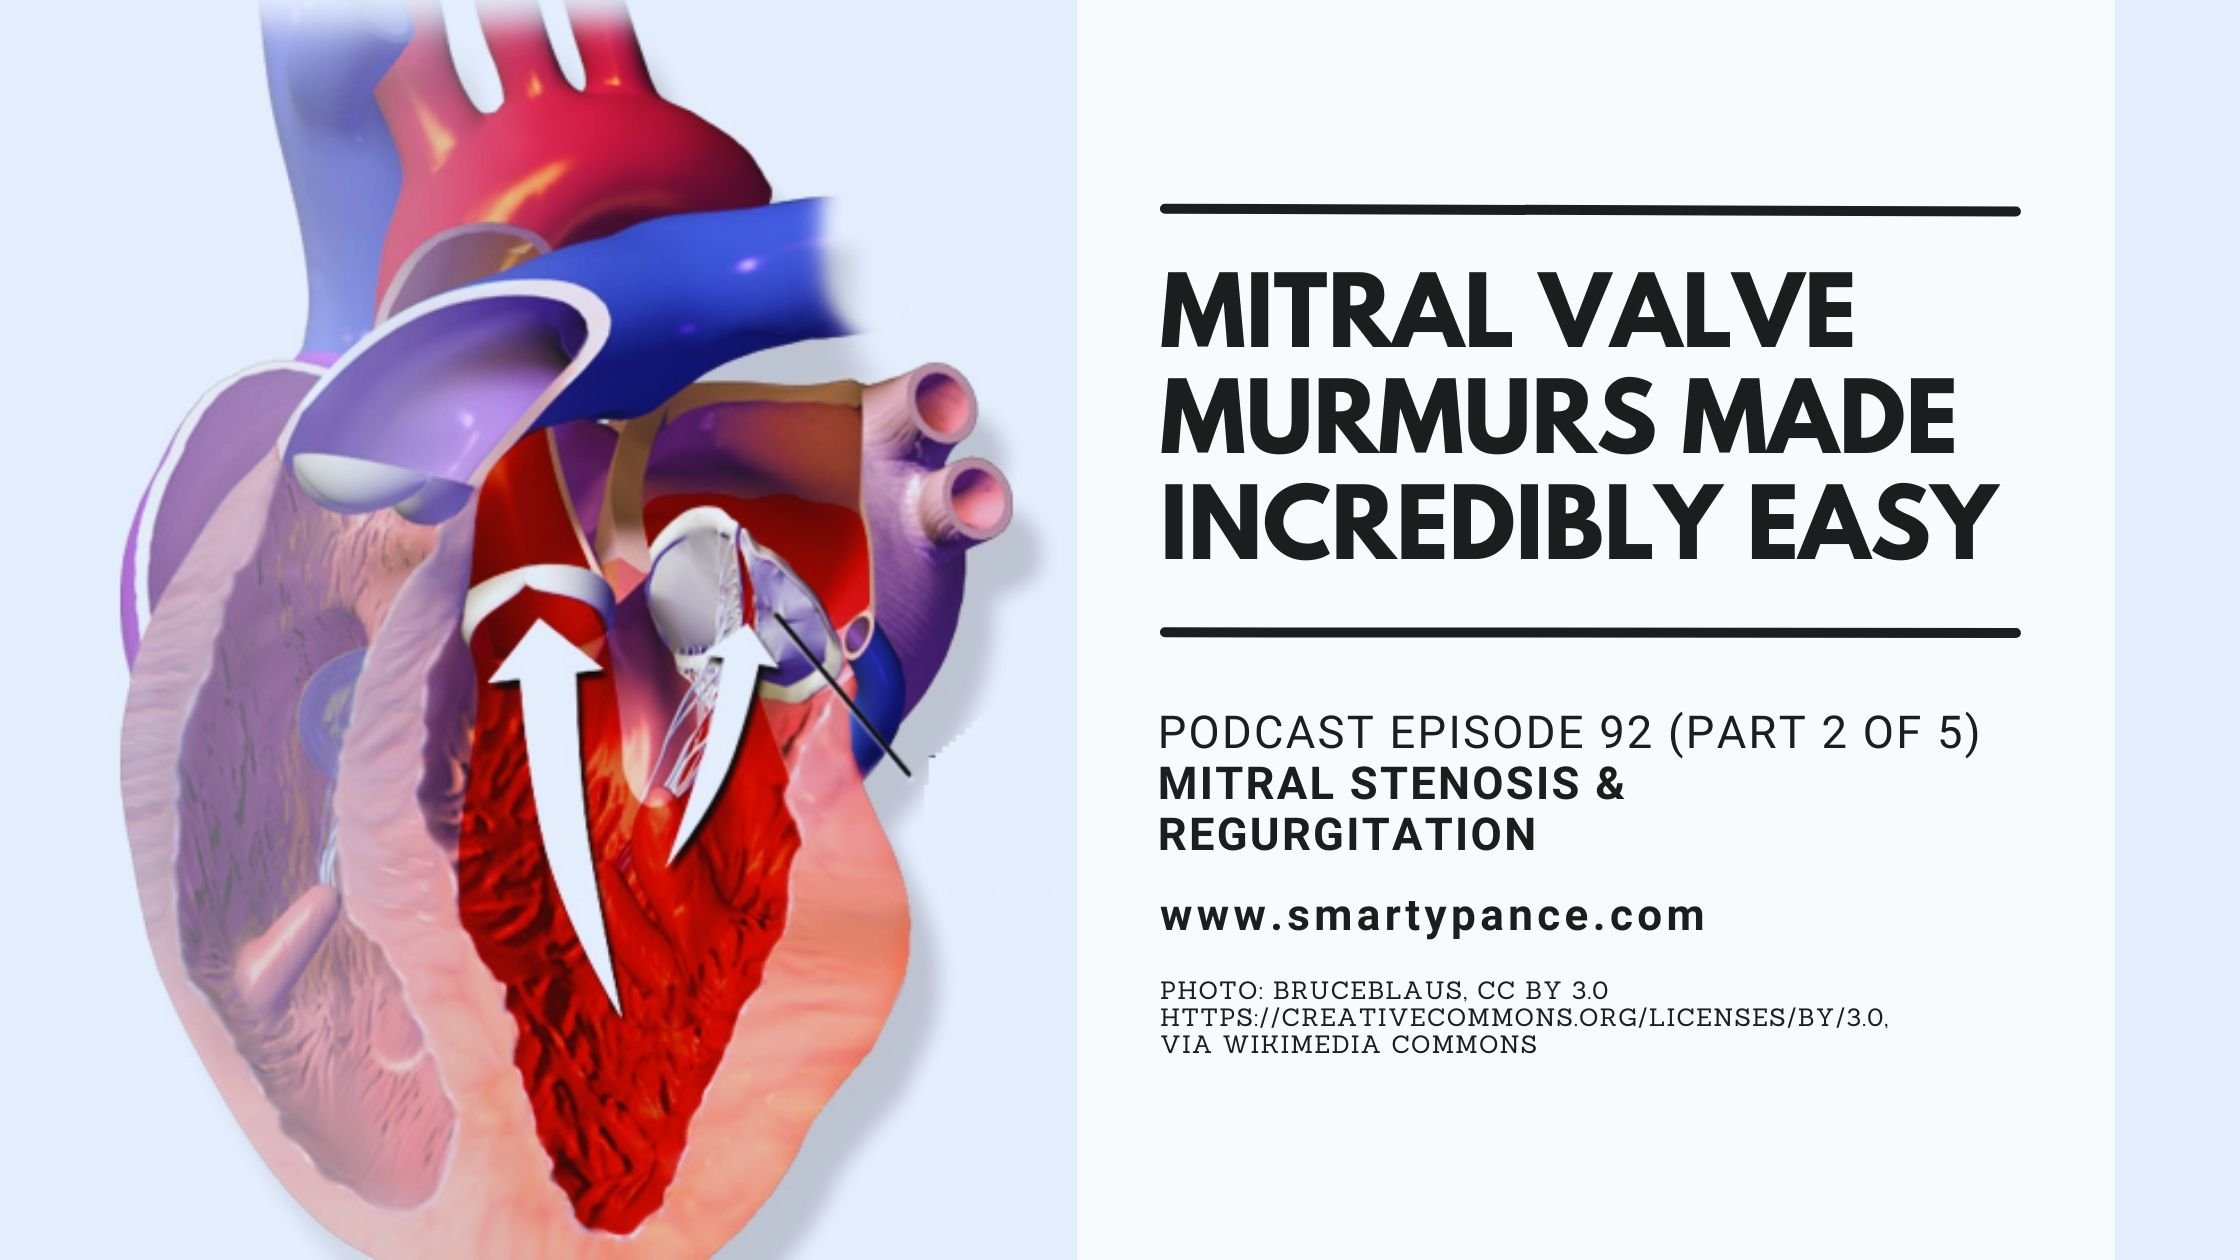 Mitral Valve Murmurs Made Incredibly Easy - Audio PANCE and PANRE PA Board Review Podcast